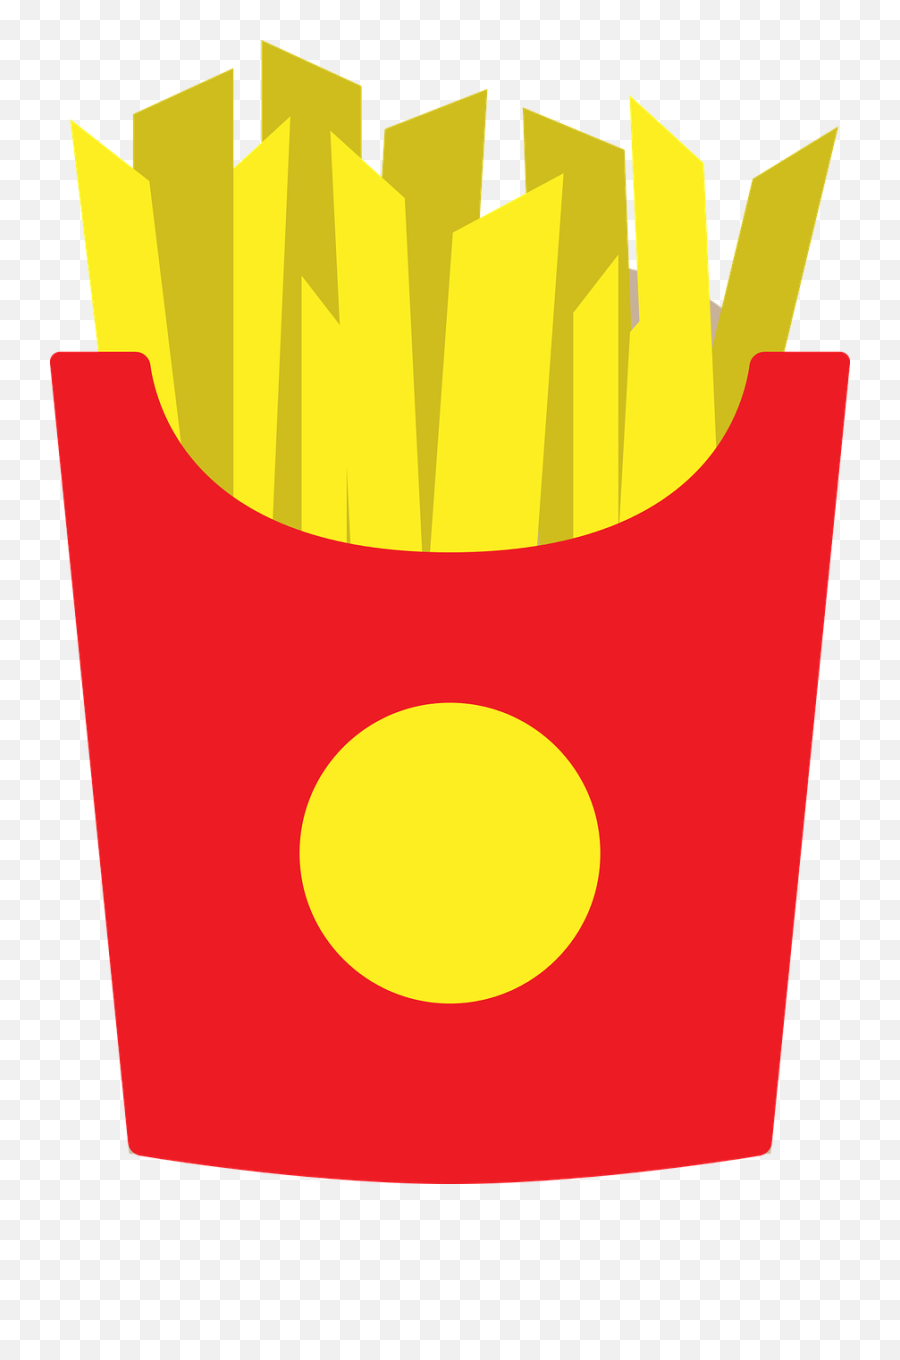 Download Salty Images - French Fries Full Size Png Image Salty Food Clipart Transparent Background Emoji,Salty Png